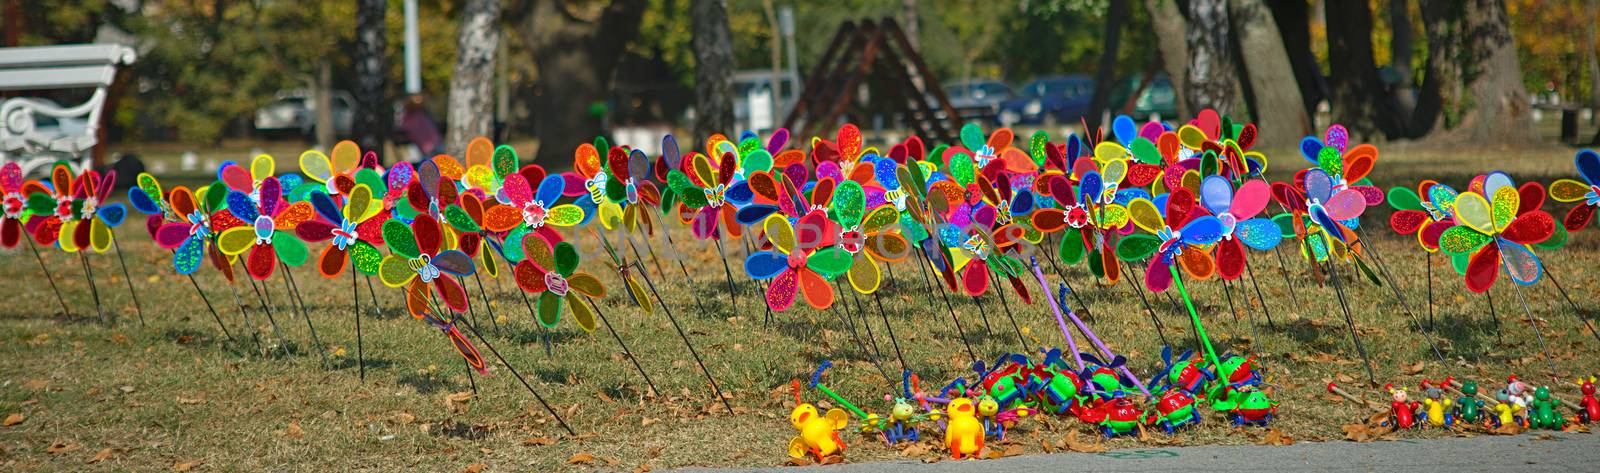 Bunch of colorful children windmill toys on a field